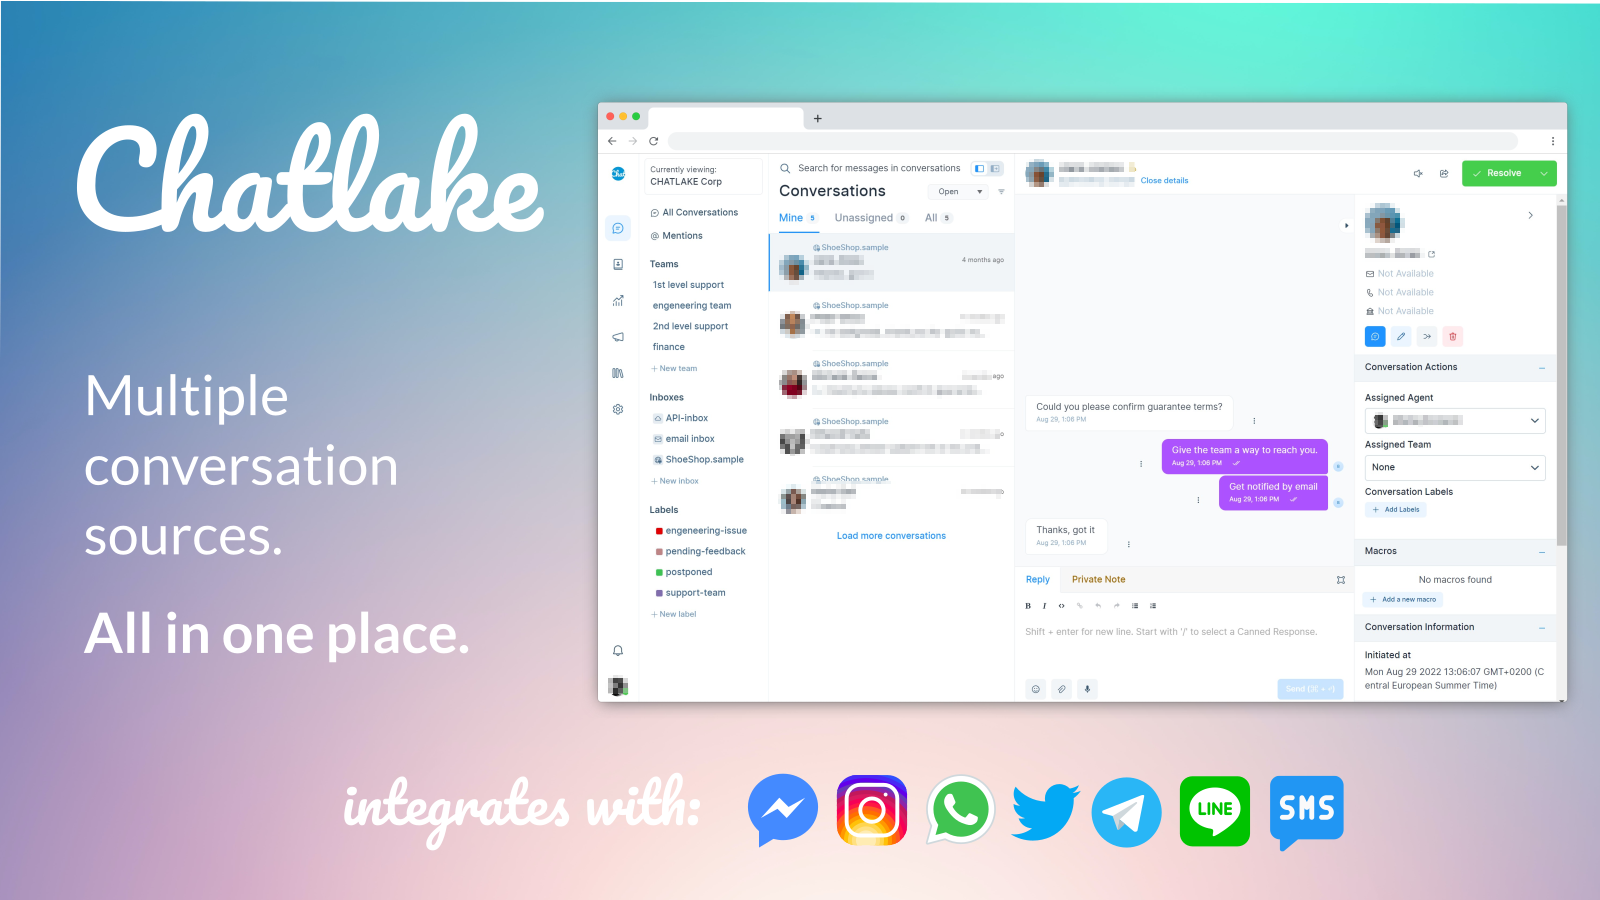 Chatlake - Shopify integrated Webchat with social media sync